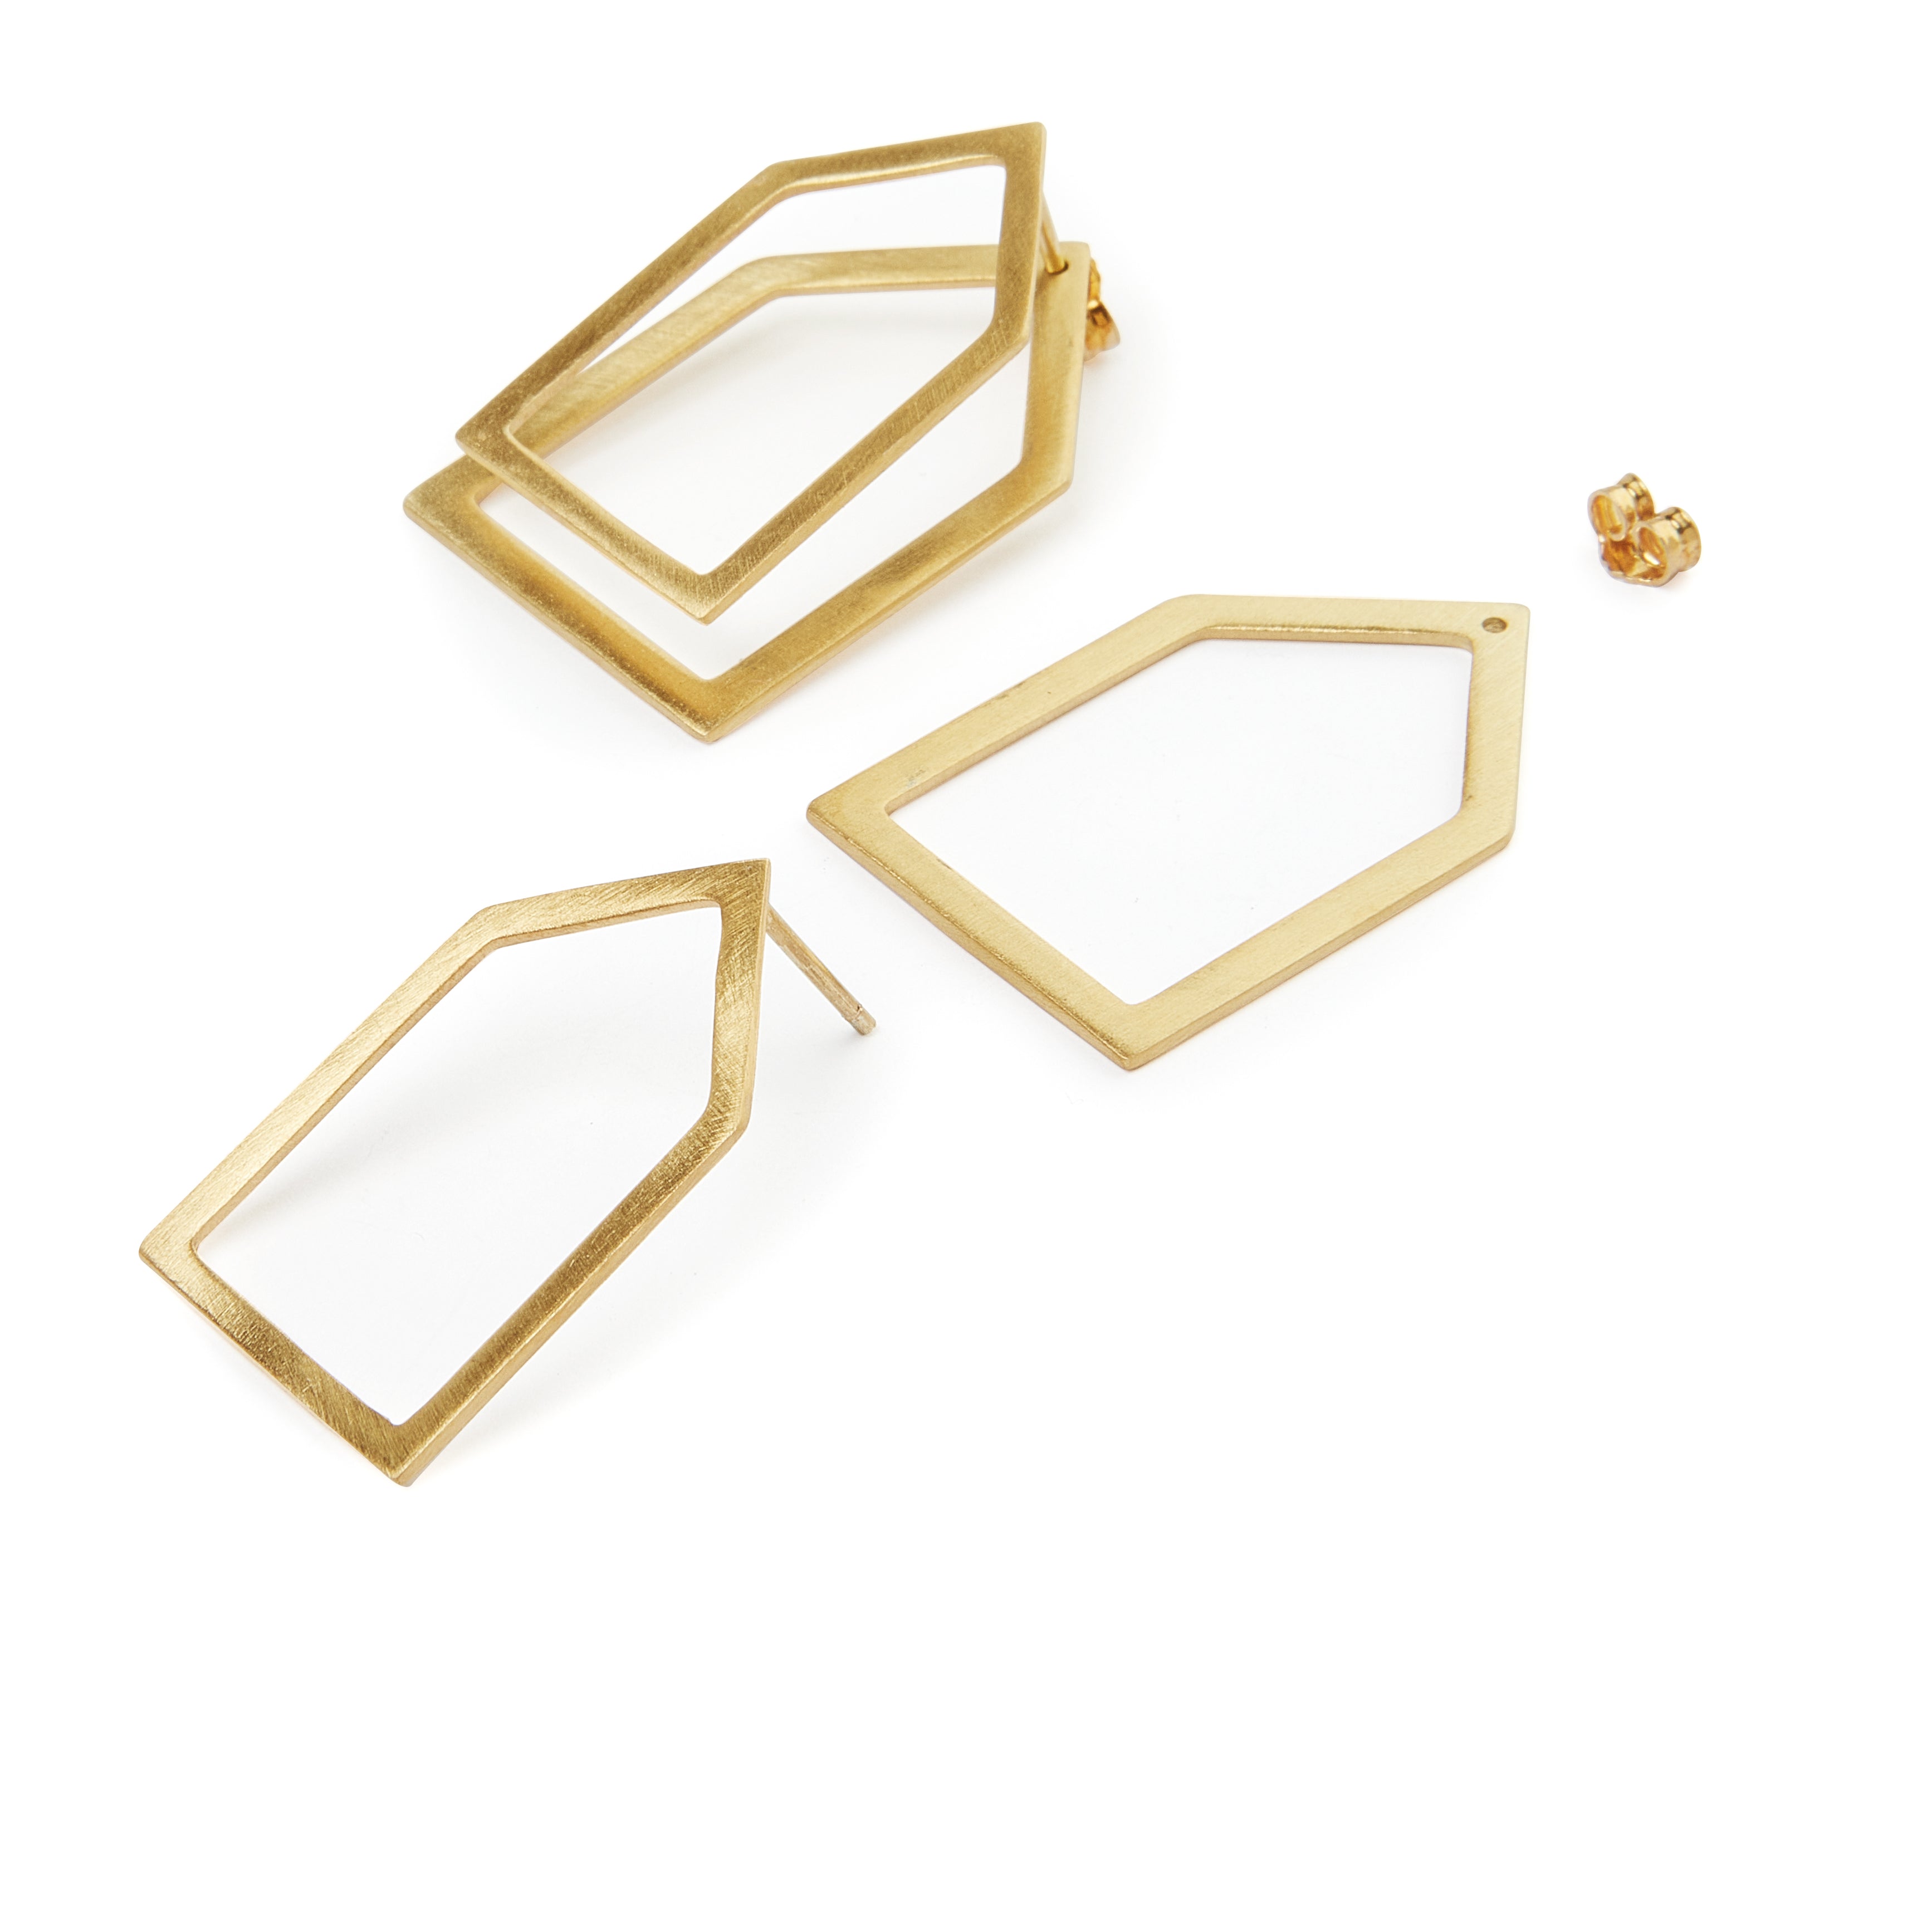 Minimal home ear jackets, comprised of two elements that can be worn together in 2 different ways, or as a single eye-catching earring. Geometric front and back earrings, made of gold-plated or platinum plated silver 925